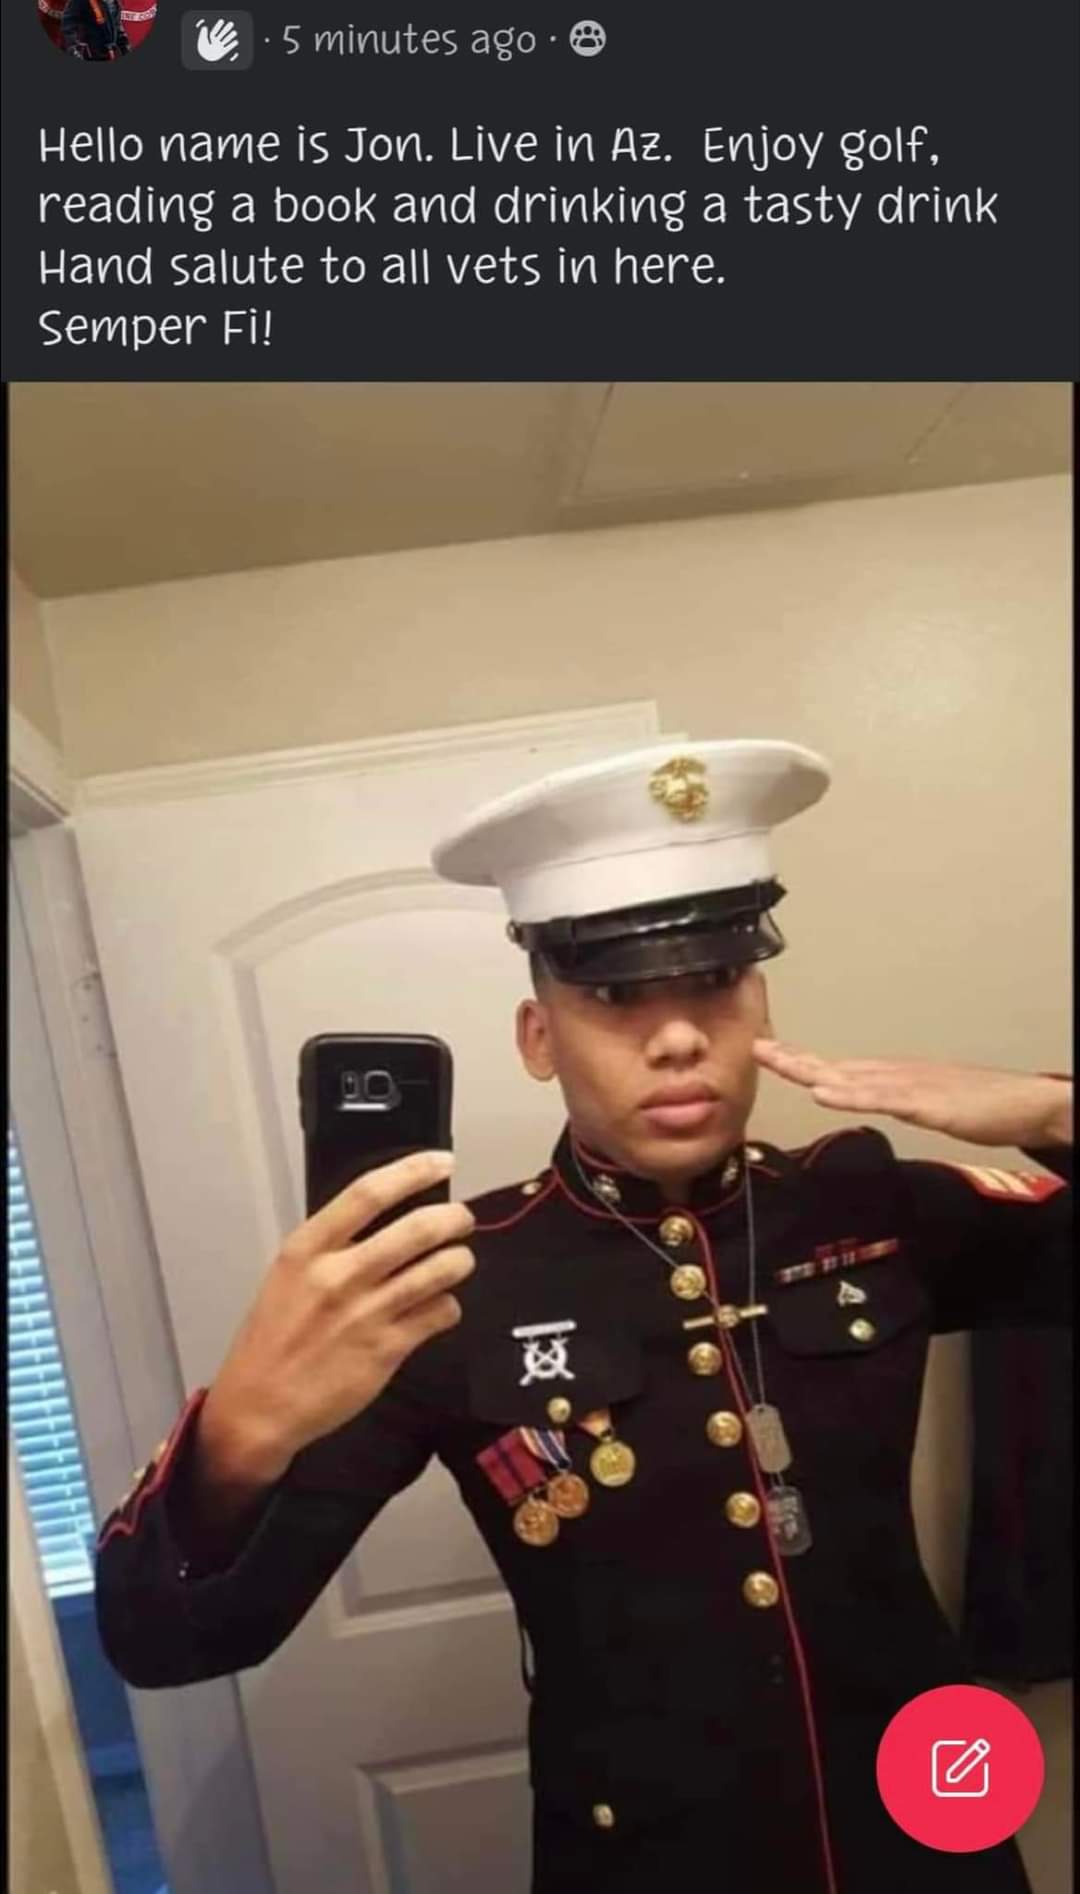 LCpl Dumbass - Hello name is Jon. Live in AZ. Enjoy golf, reading a book and drinking a tasty drink. Hand salute to all vets in here. Semper Fi!